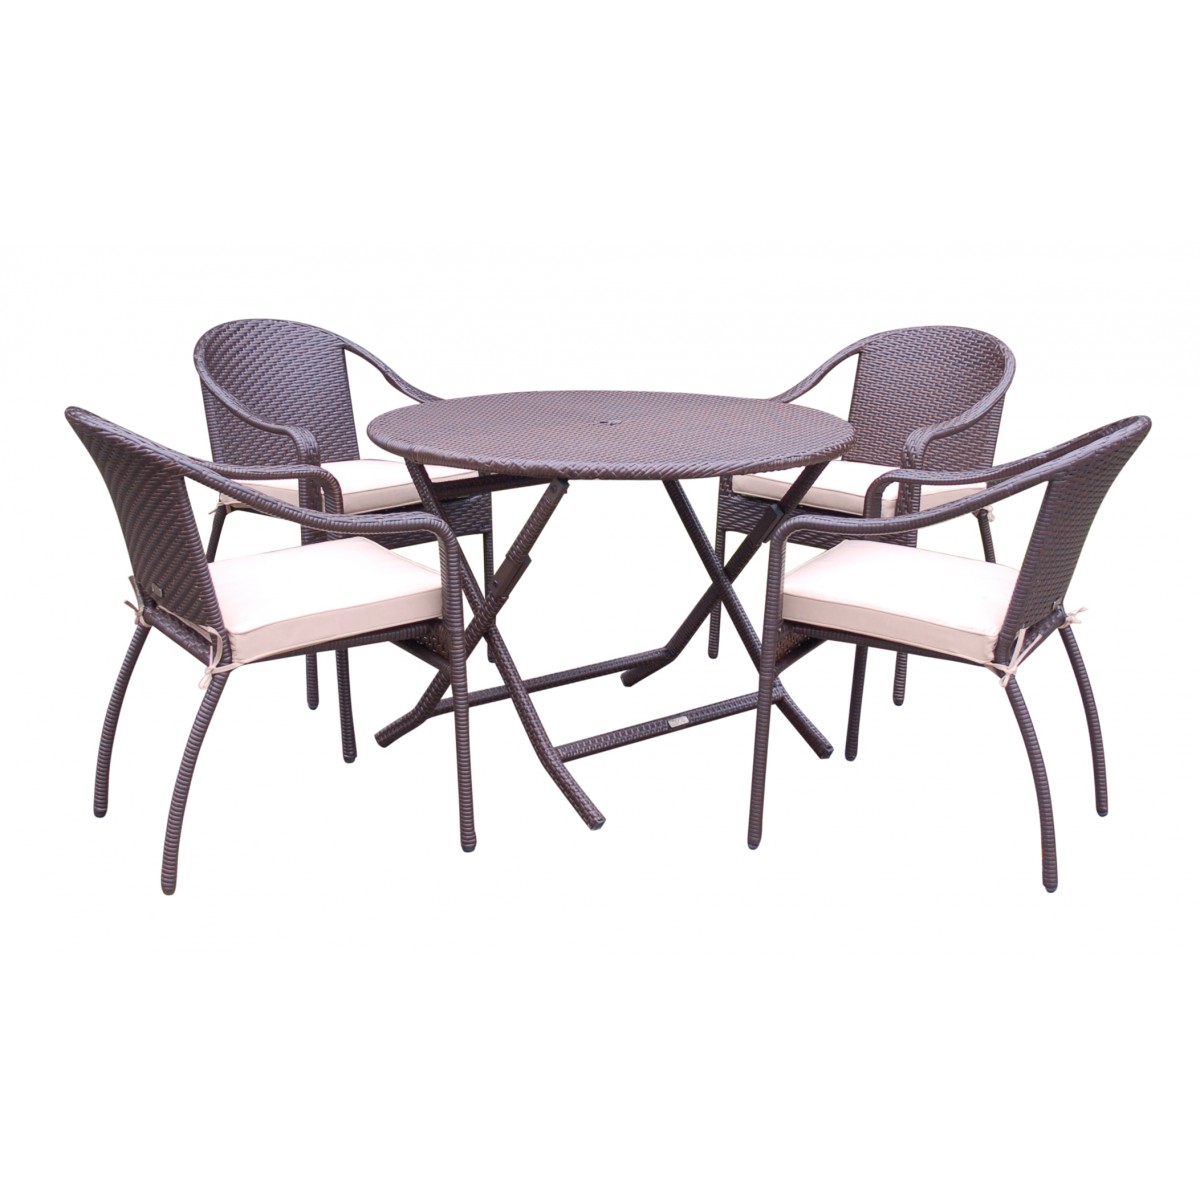 5pcs Cafe Curved Back Chairs and Folding Wicker Table Dining Set - Tan ...